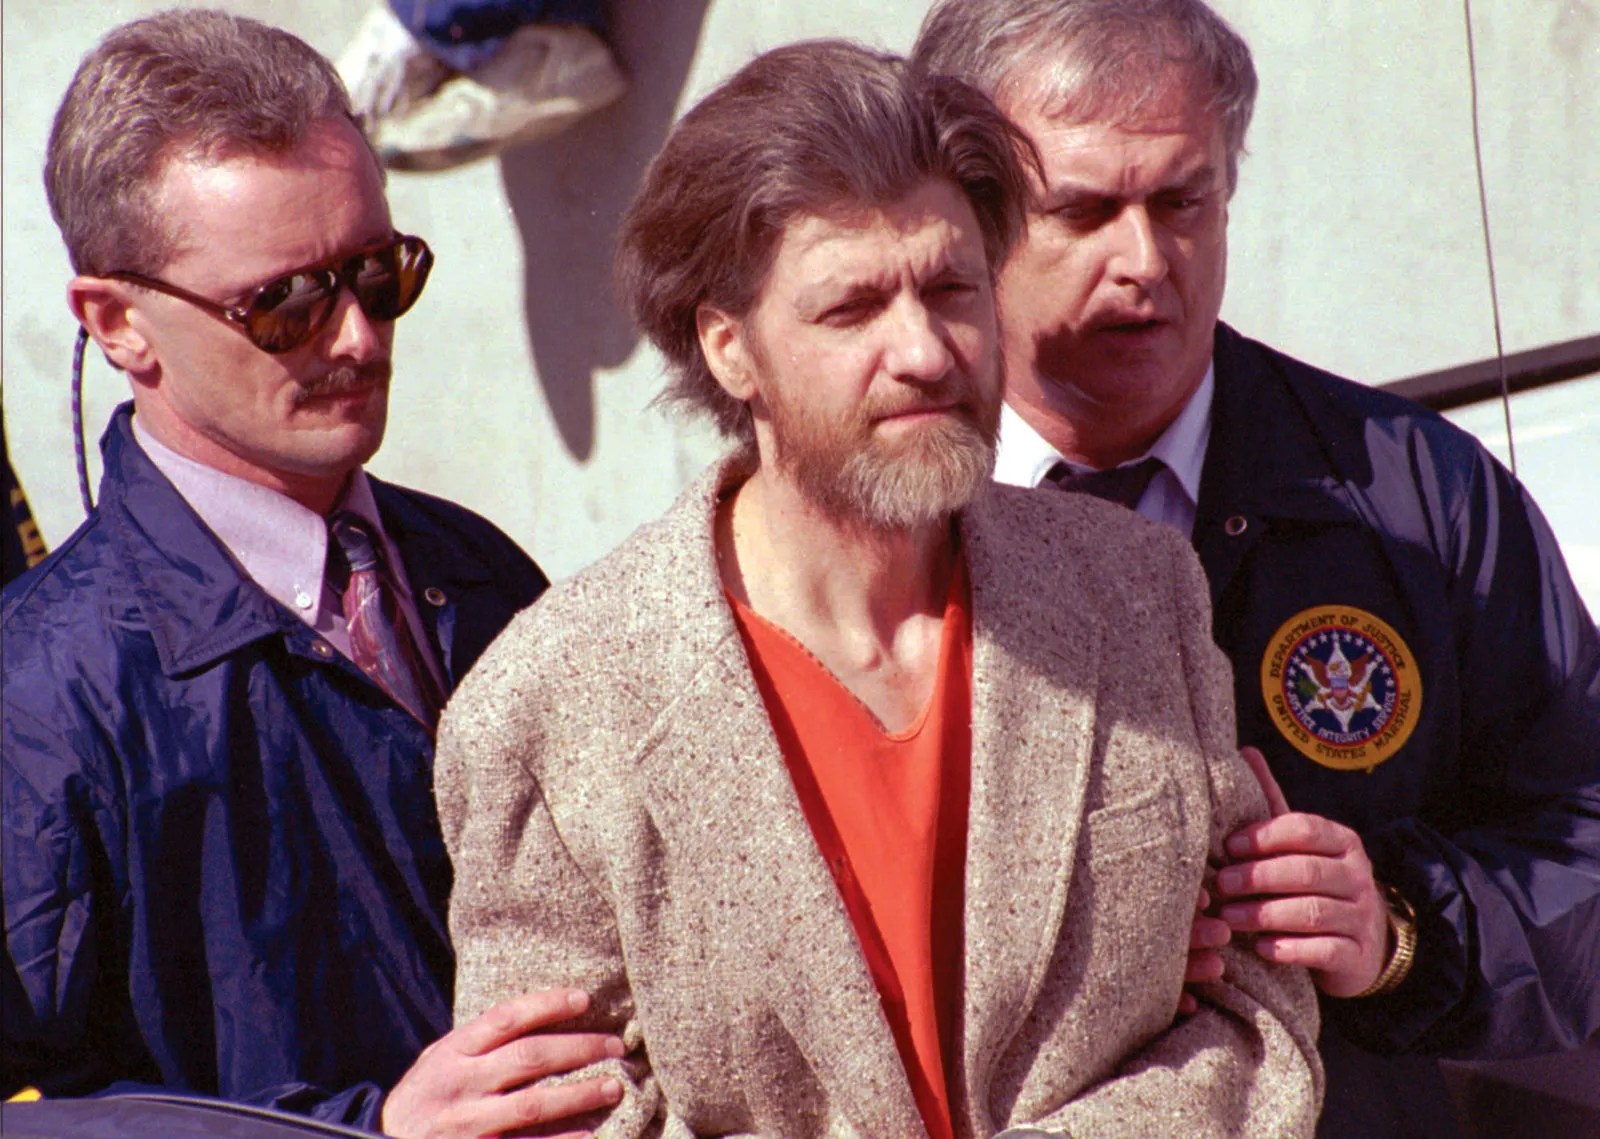 1996 The Unabomber, Ted Kaczynski, is arrested